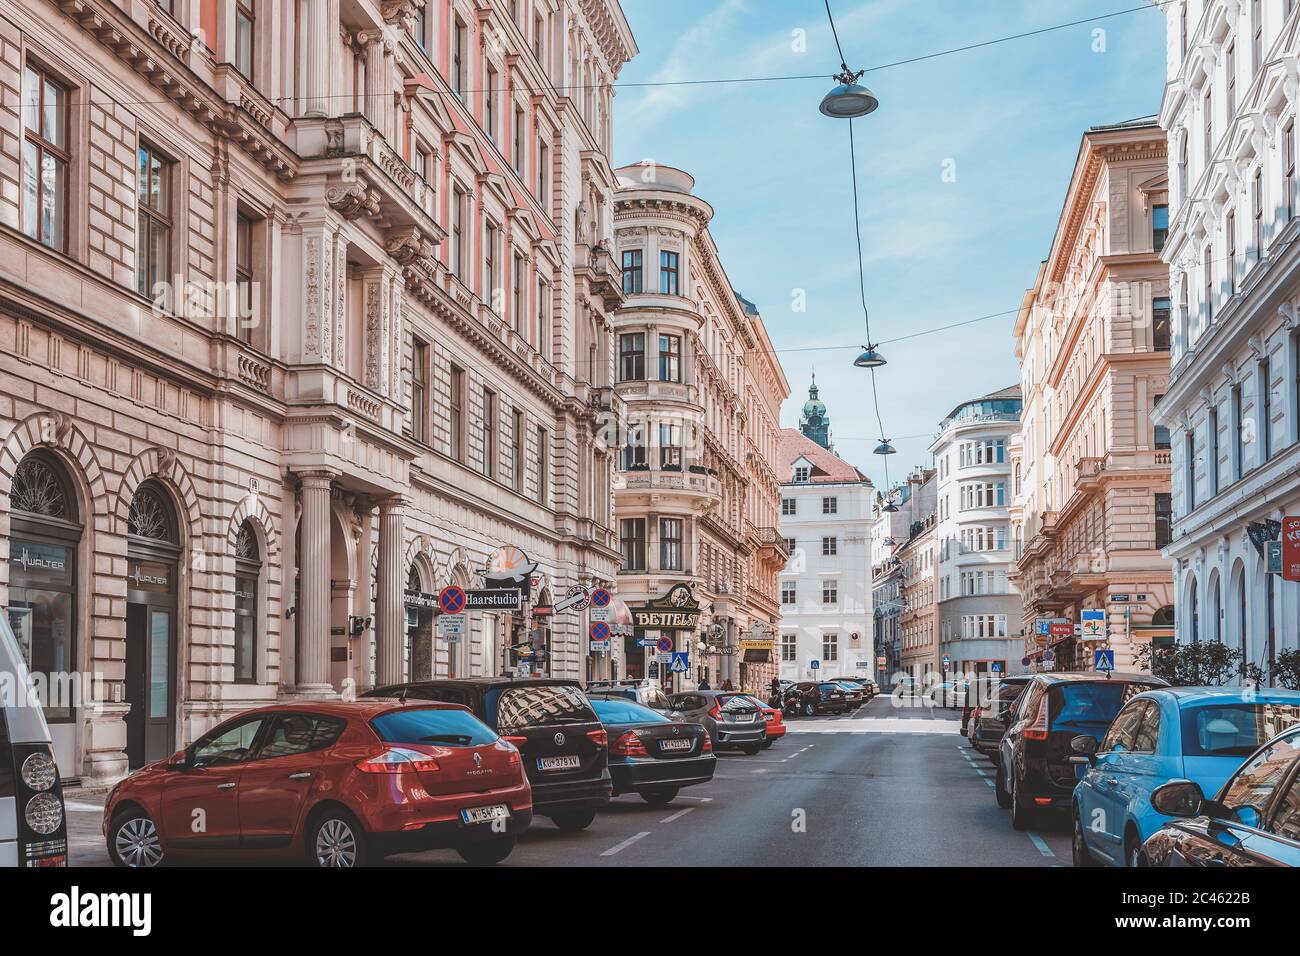 Vienna city scene of typical street and buildings during daytime Stock Photo